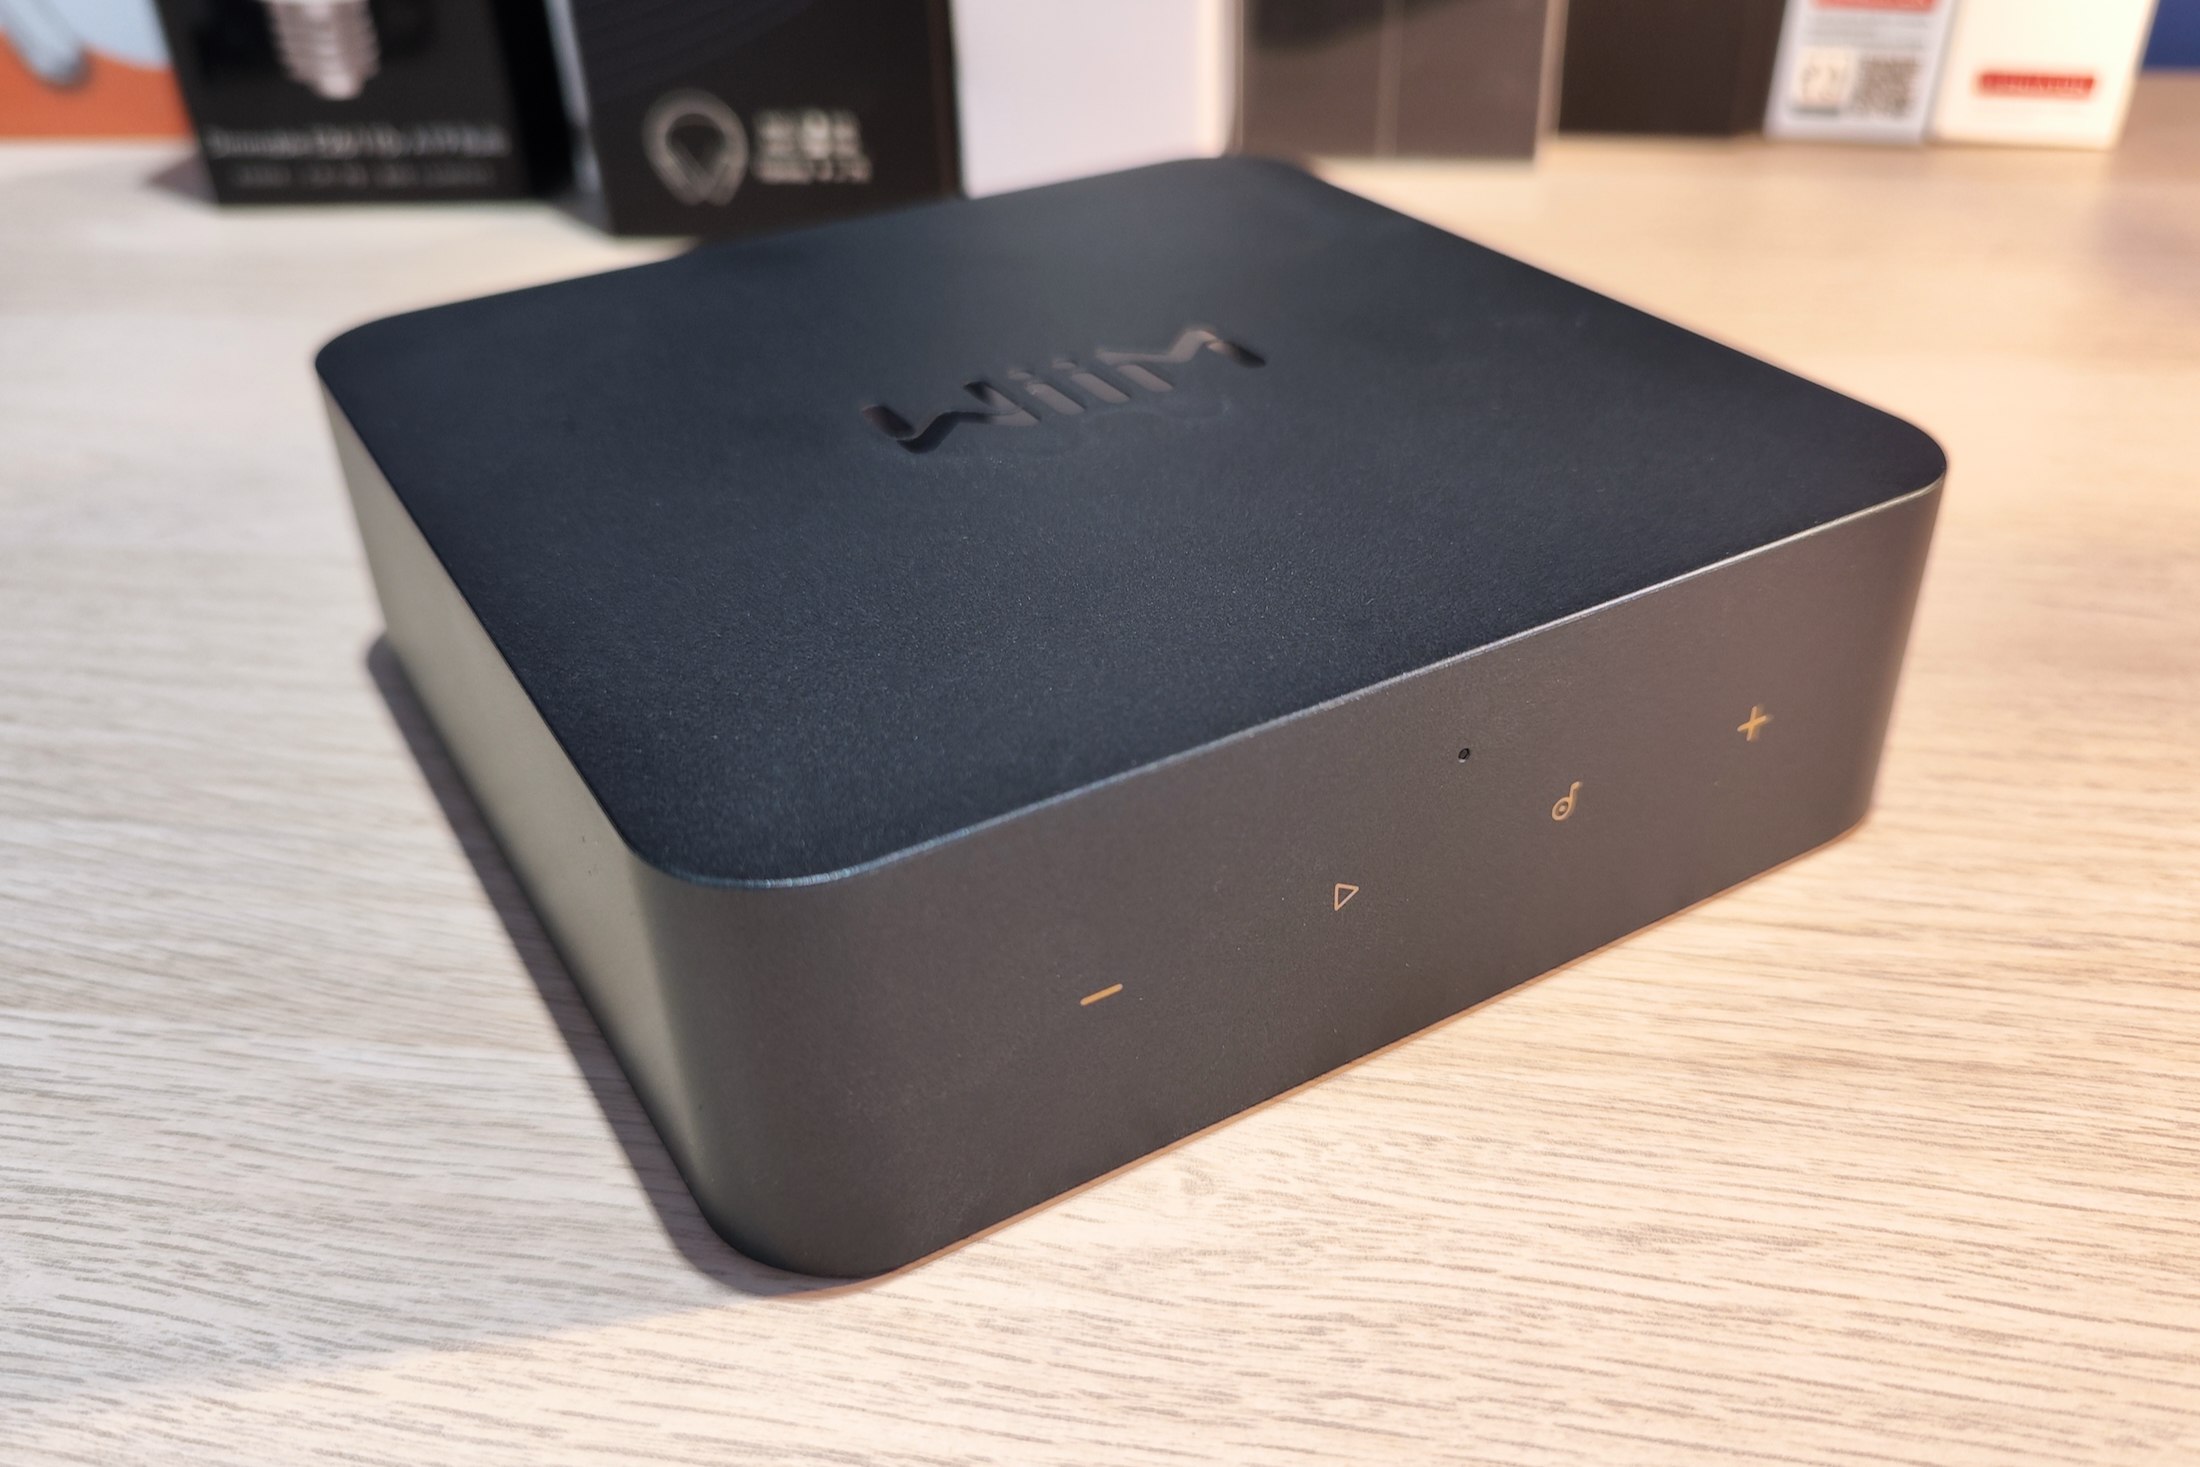 Wiim's new amplified streamer mimics the Sonos Amp, for $299